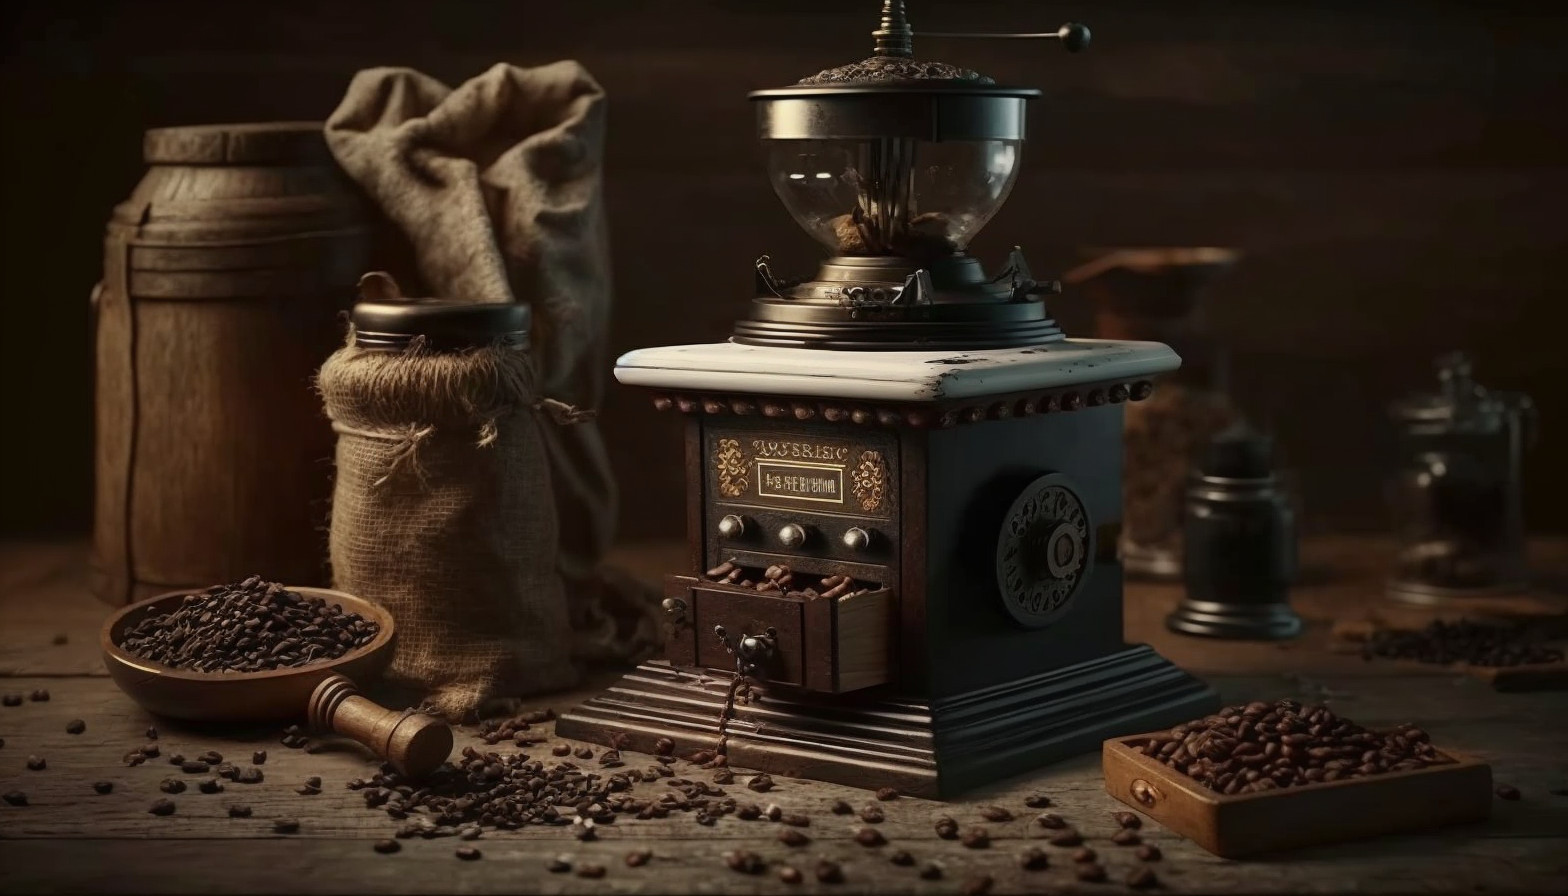 Comparing electric vs hand coffee grinder